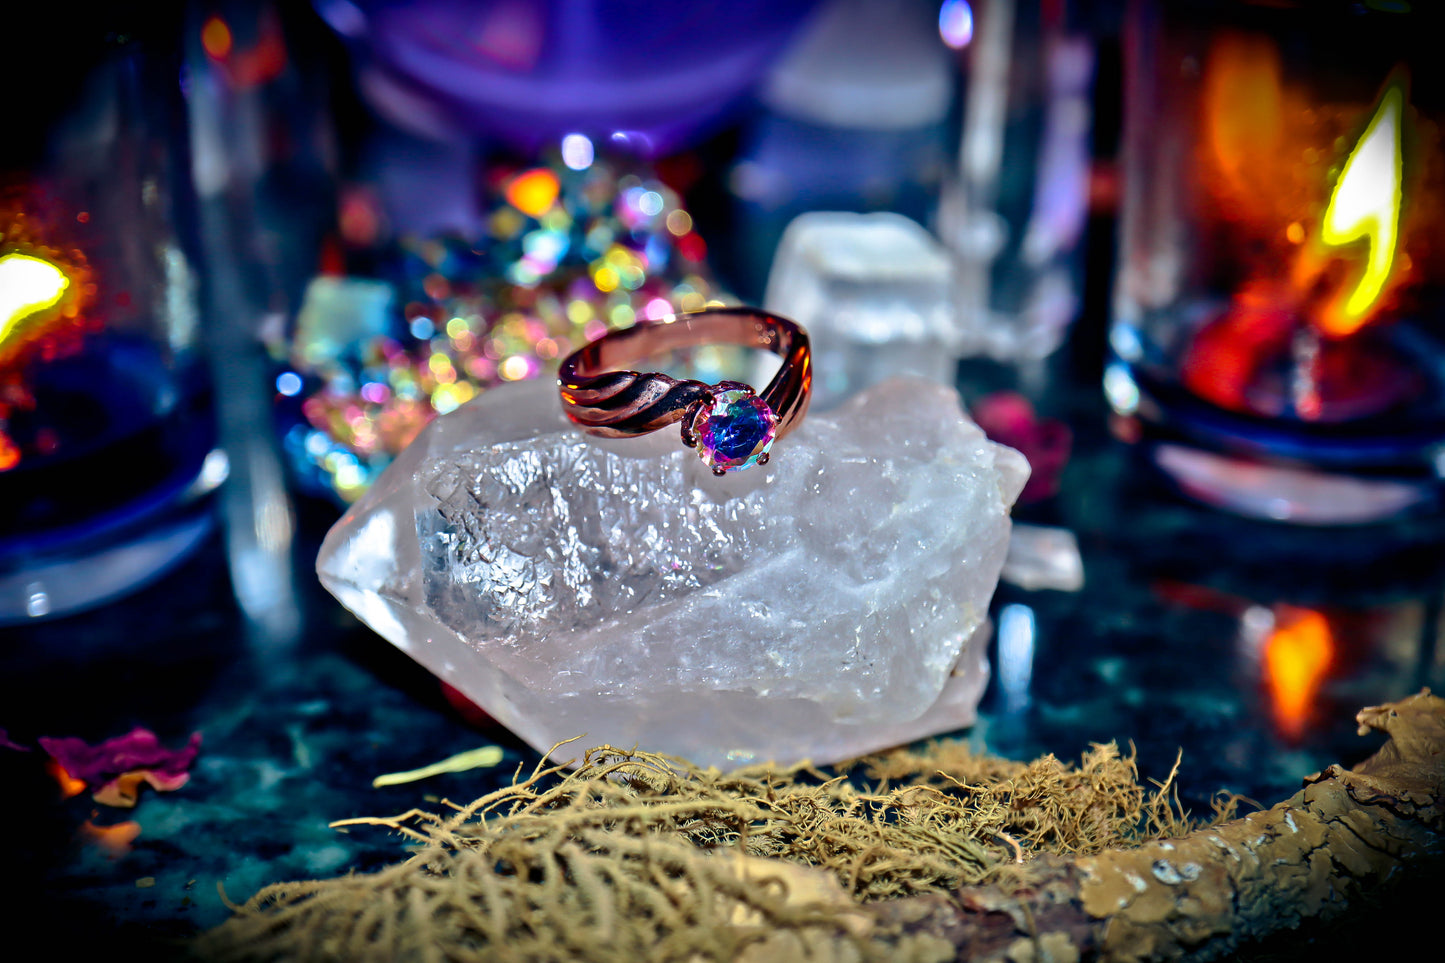 AURA CLEANSING Sacred Purification Spell Banish Negative Energy White Magick Haunted Wicca Ring ~ Repel Dark Forces, Eliminate Bad Karma! ~ 100% REAL MAGIC * Top Level Sacred BLESSINGS!